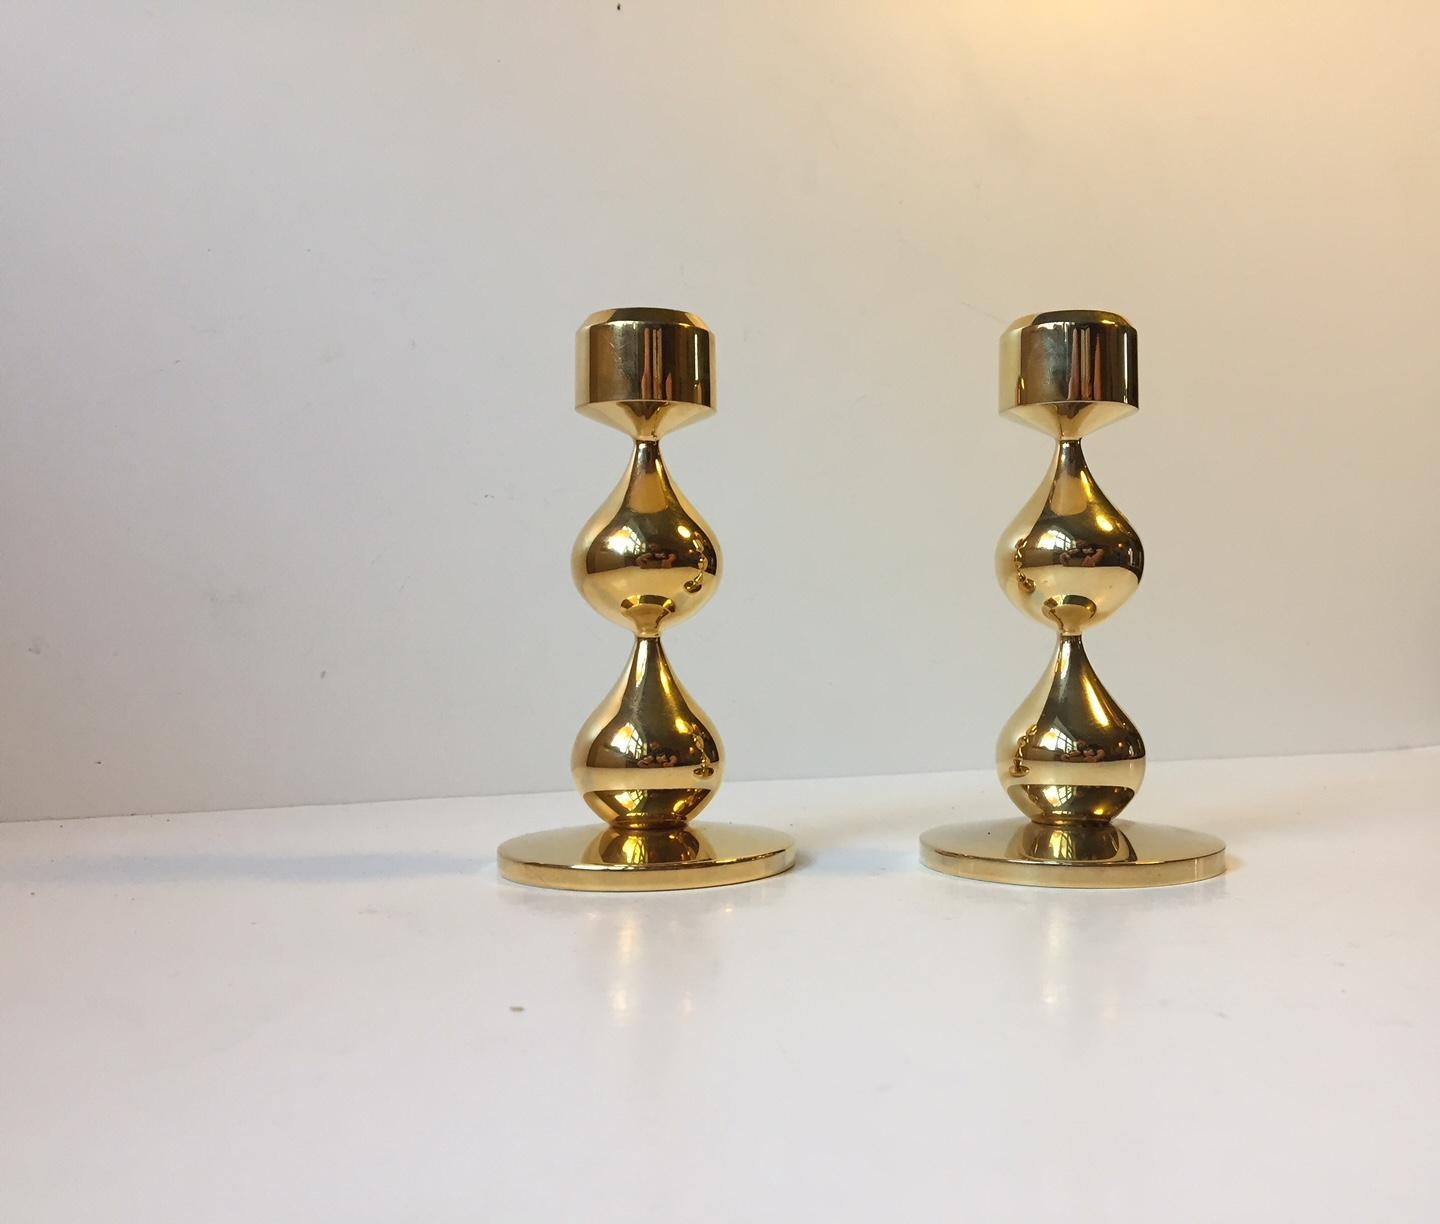 This set of organically-teardrop shaped 24-carat gold-plated candle holders was designed by Hugo Asmussen. The pieces were manufactured by Asmussen in Denmark in the 1960s. Candle size: regular.